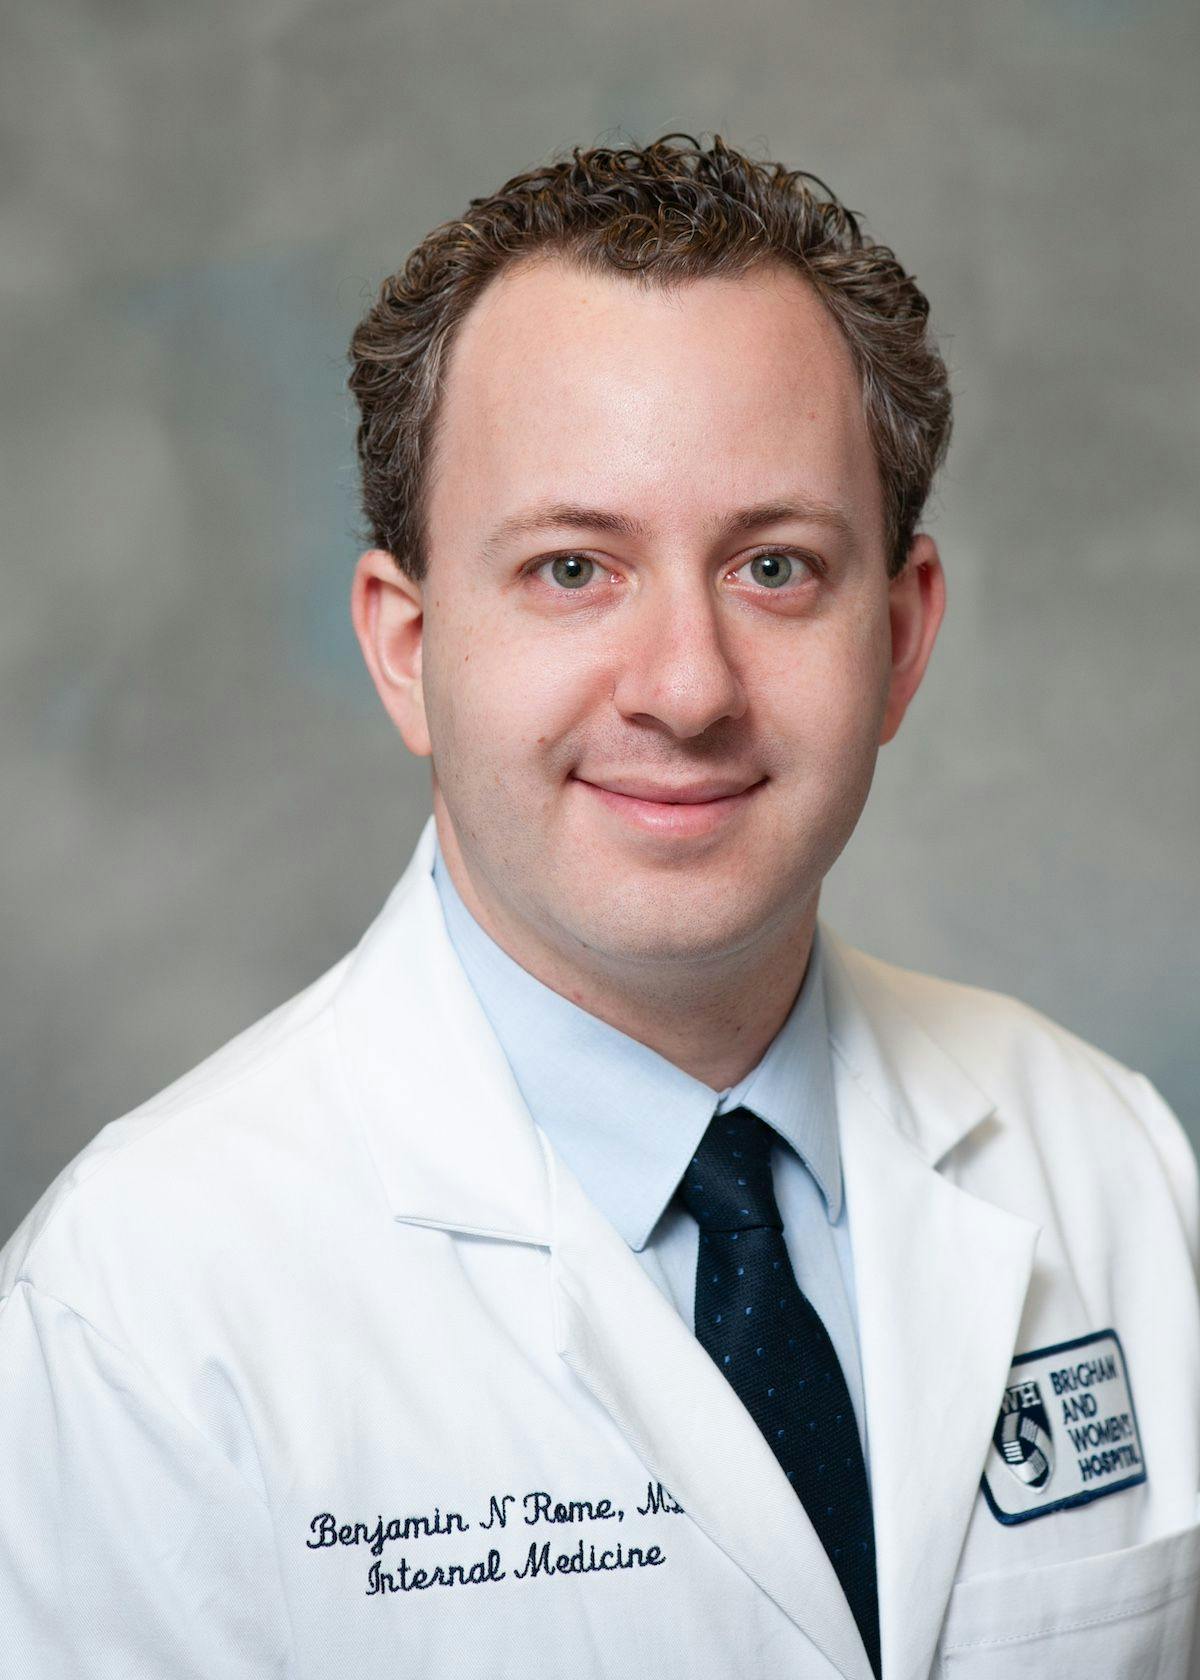 Benjamin N. Rome, MD, MPH | Image Credit: Brigham and Women's Hospital